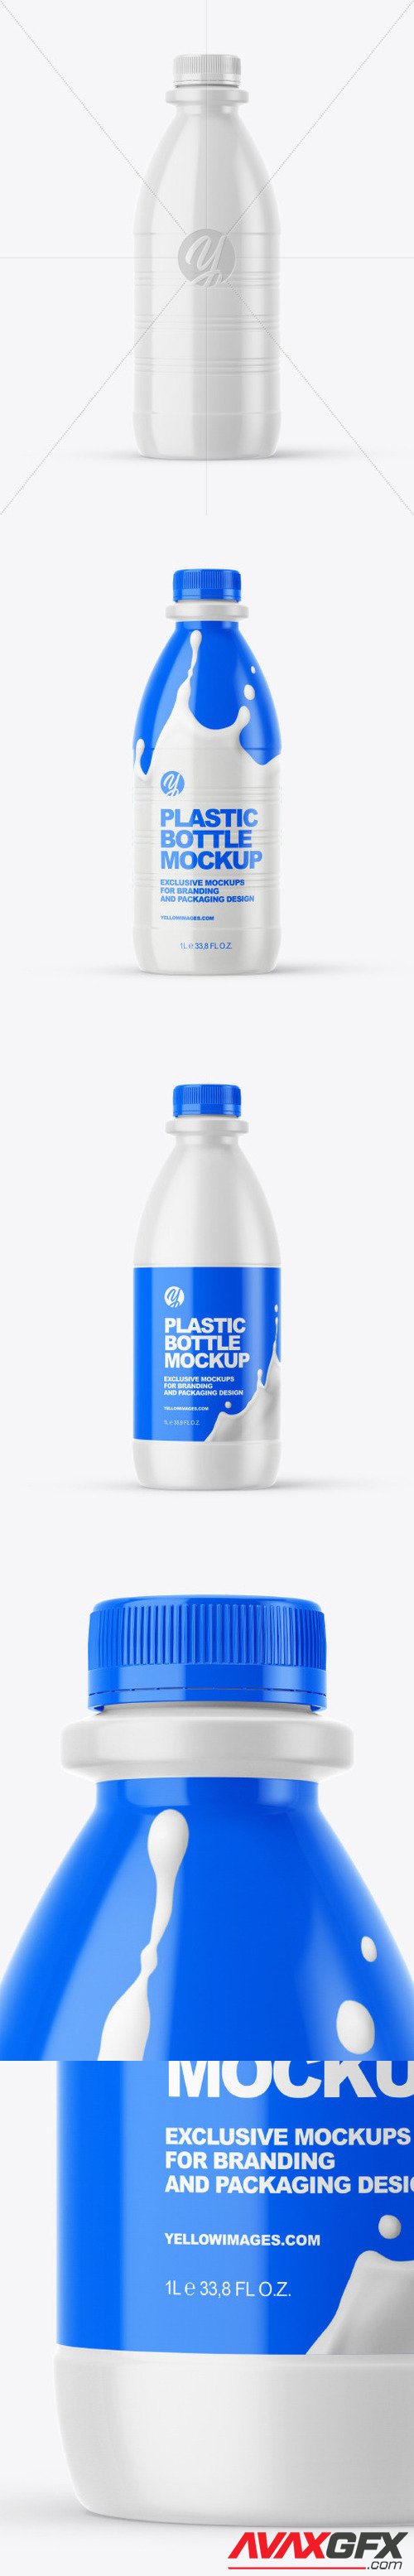 Dairy Bottle with Glossy Shrink Sleeve Mockup 51711 [TIF]